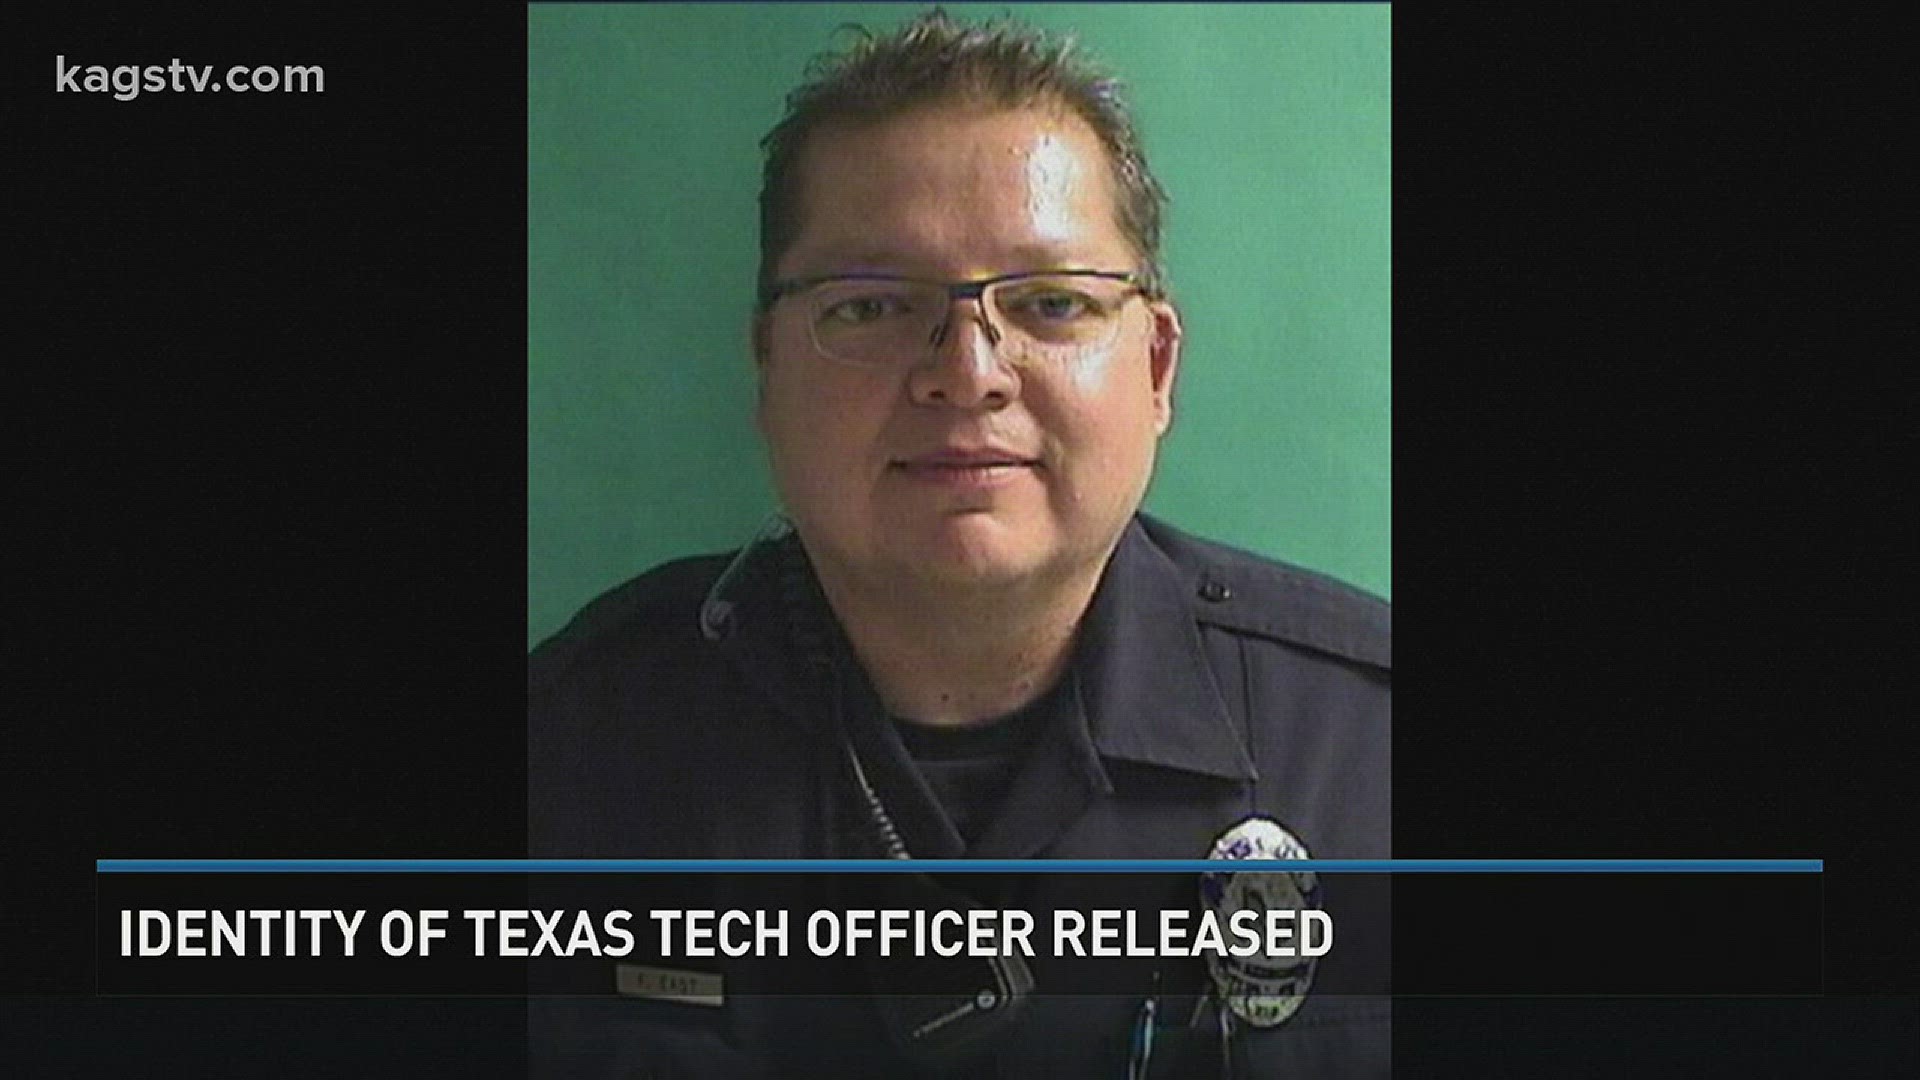 A Texas Tech student speaks about the shooting that killed a campus officer.